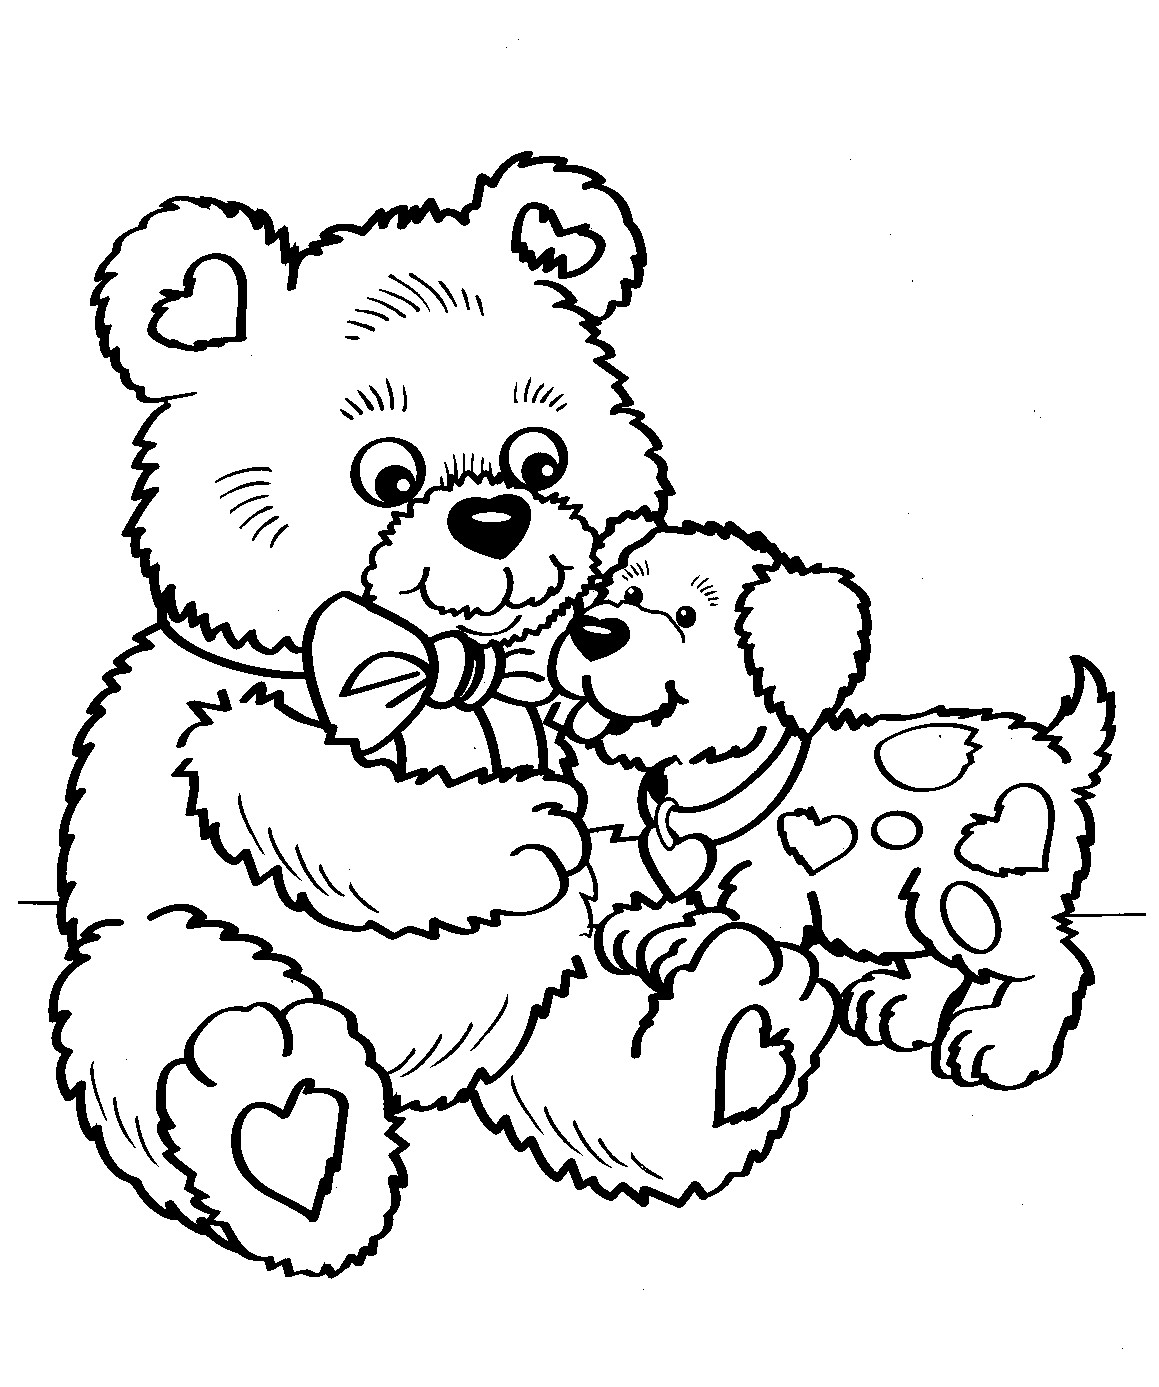 Free Printable Valentines Coloring Pages
 Coloring Pages Hearts Free Printable Coloring Pages for